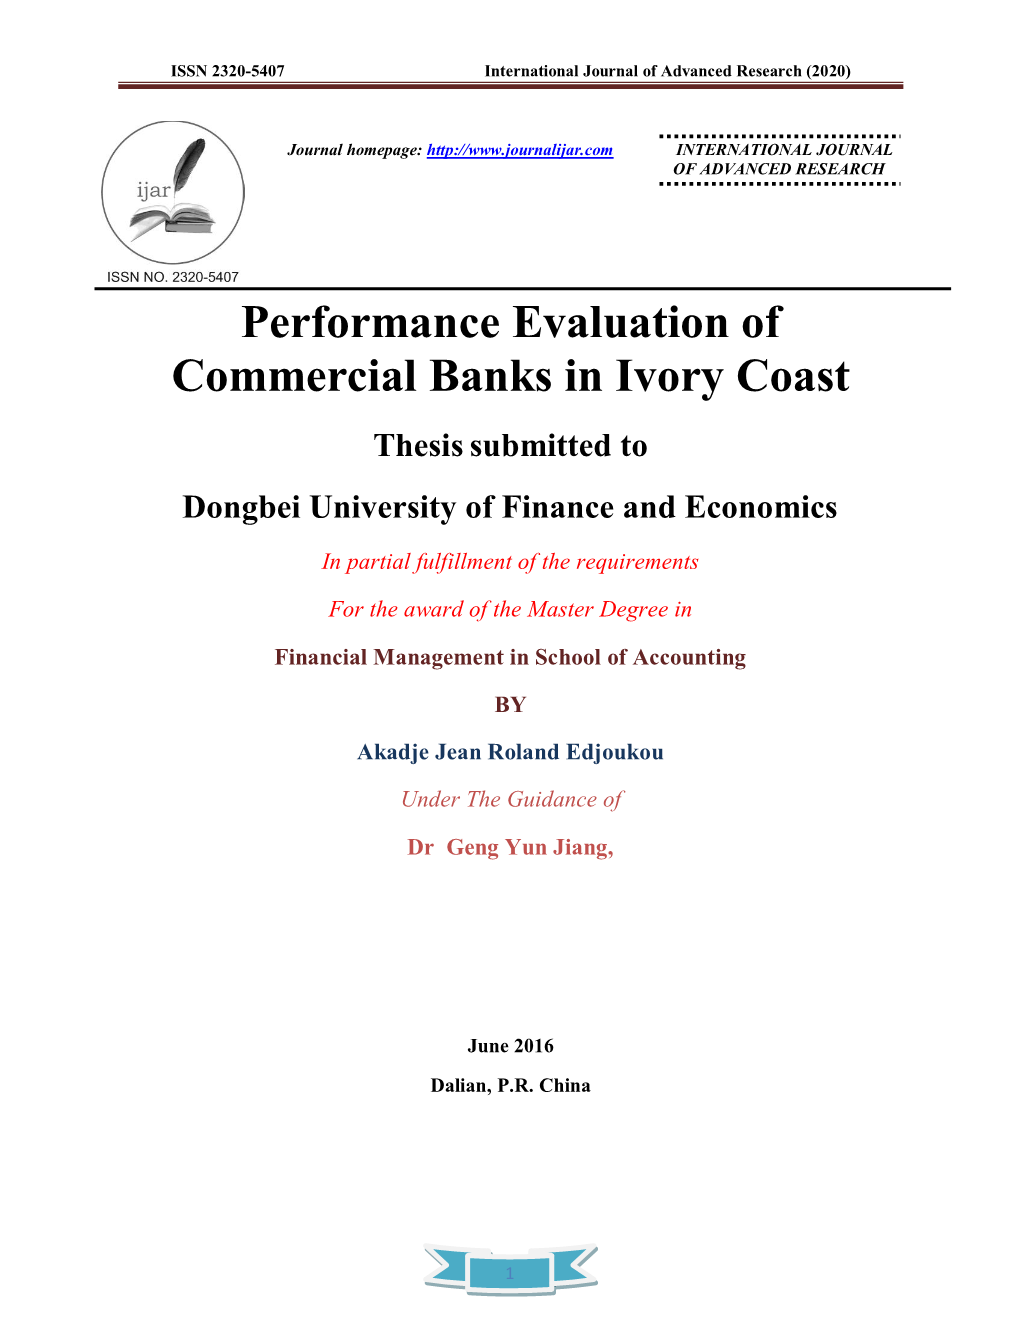 Performance Evaluation of Commercial Banks in Ivory Coast